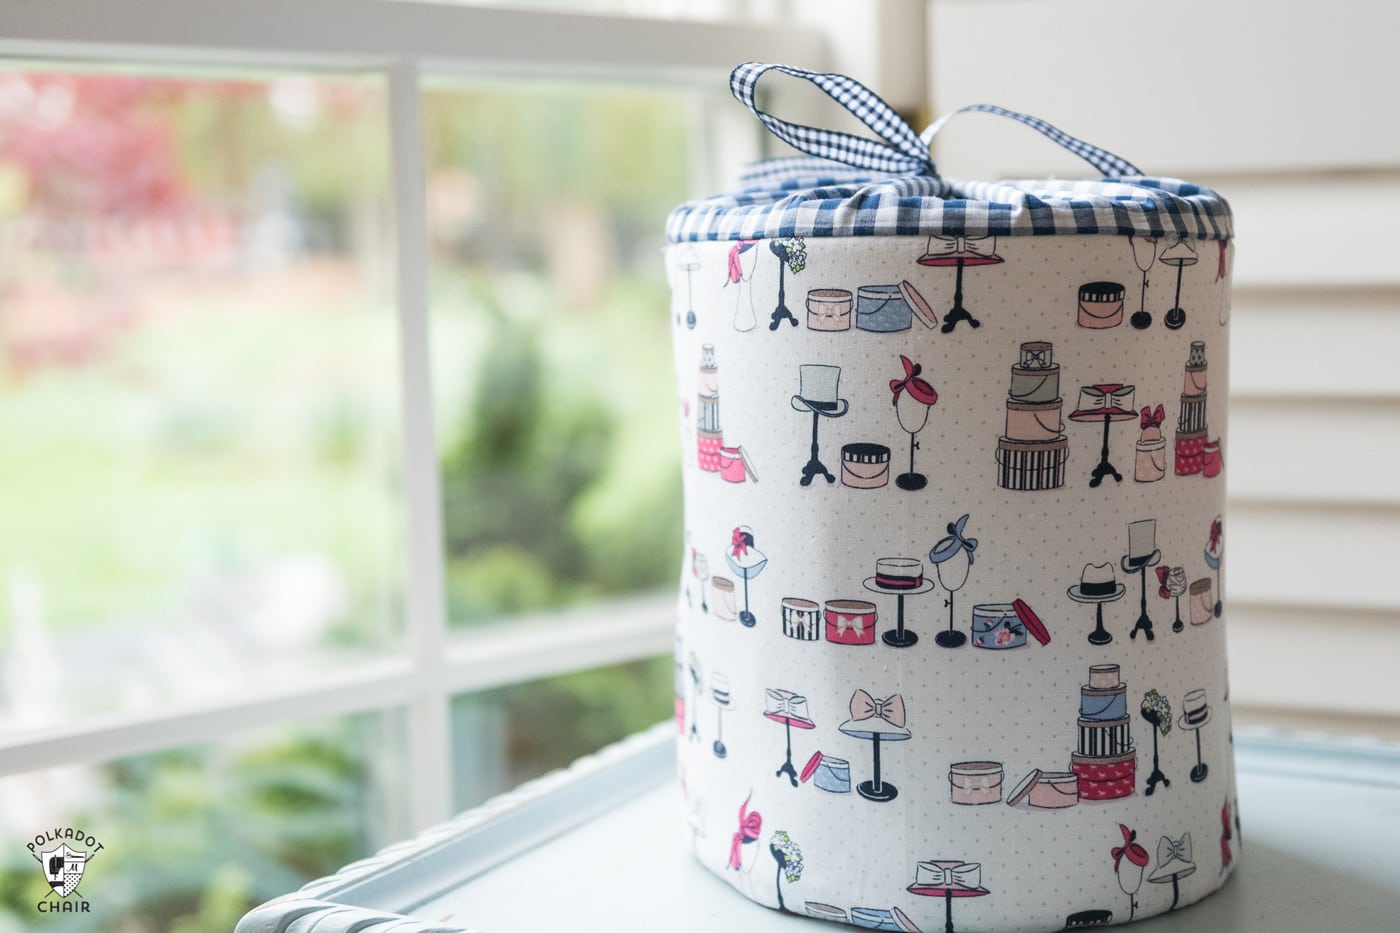 Learn how to make fabric storage bins with this sewing pattern. Round padded storage bins, great for organization projects! #fabricbins #fabricstorage #fabricbasket #sewingpattern #DIYBasket 